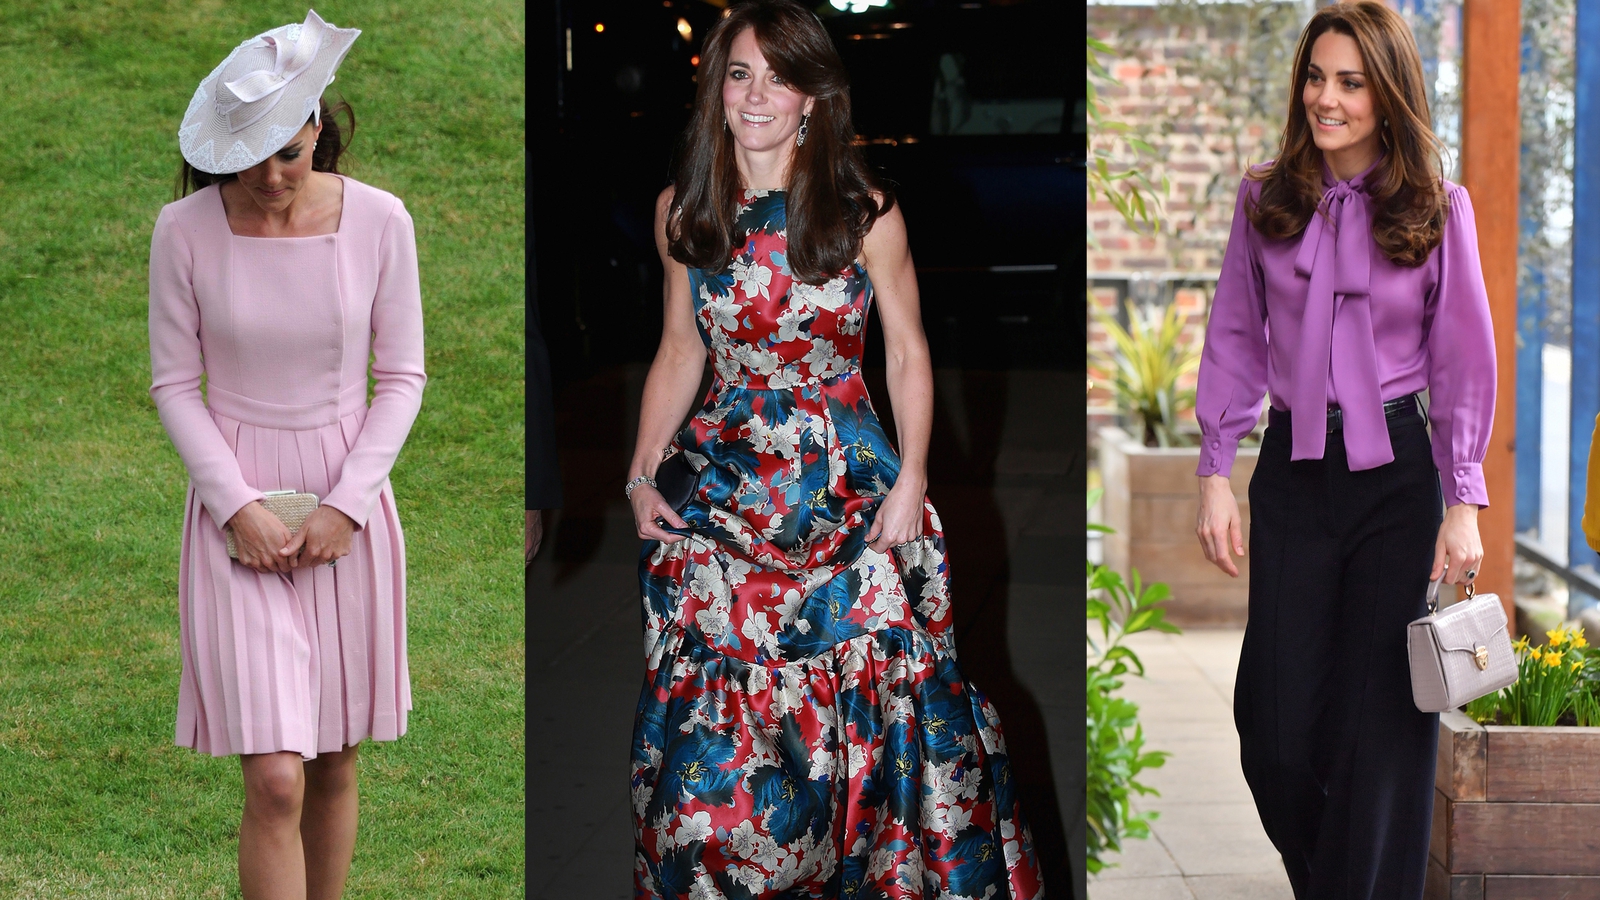 10 looks that show how Kate Middleton's royal style has evolved